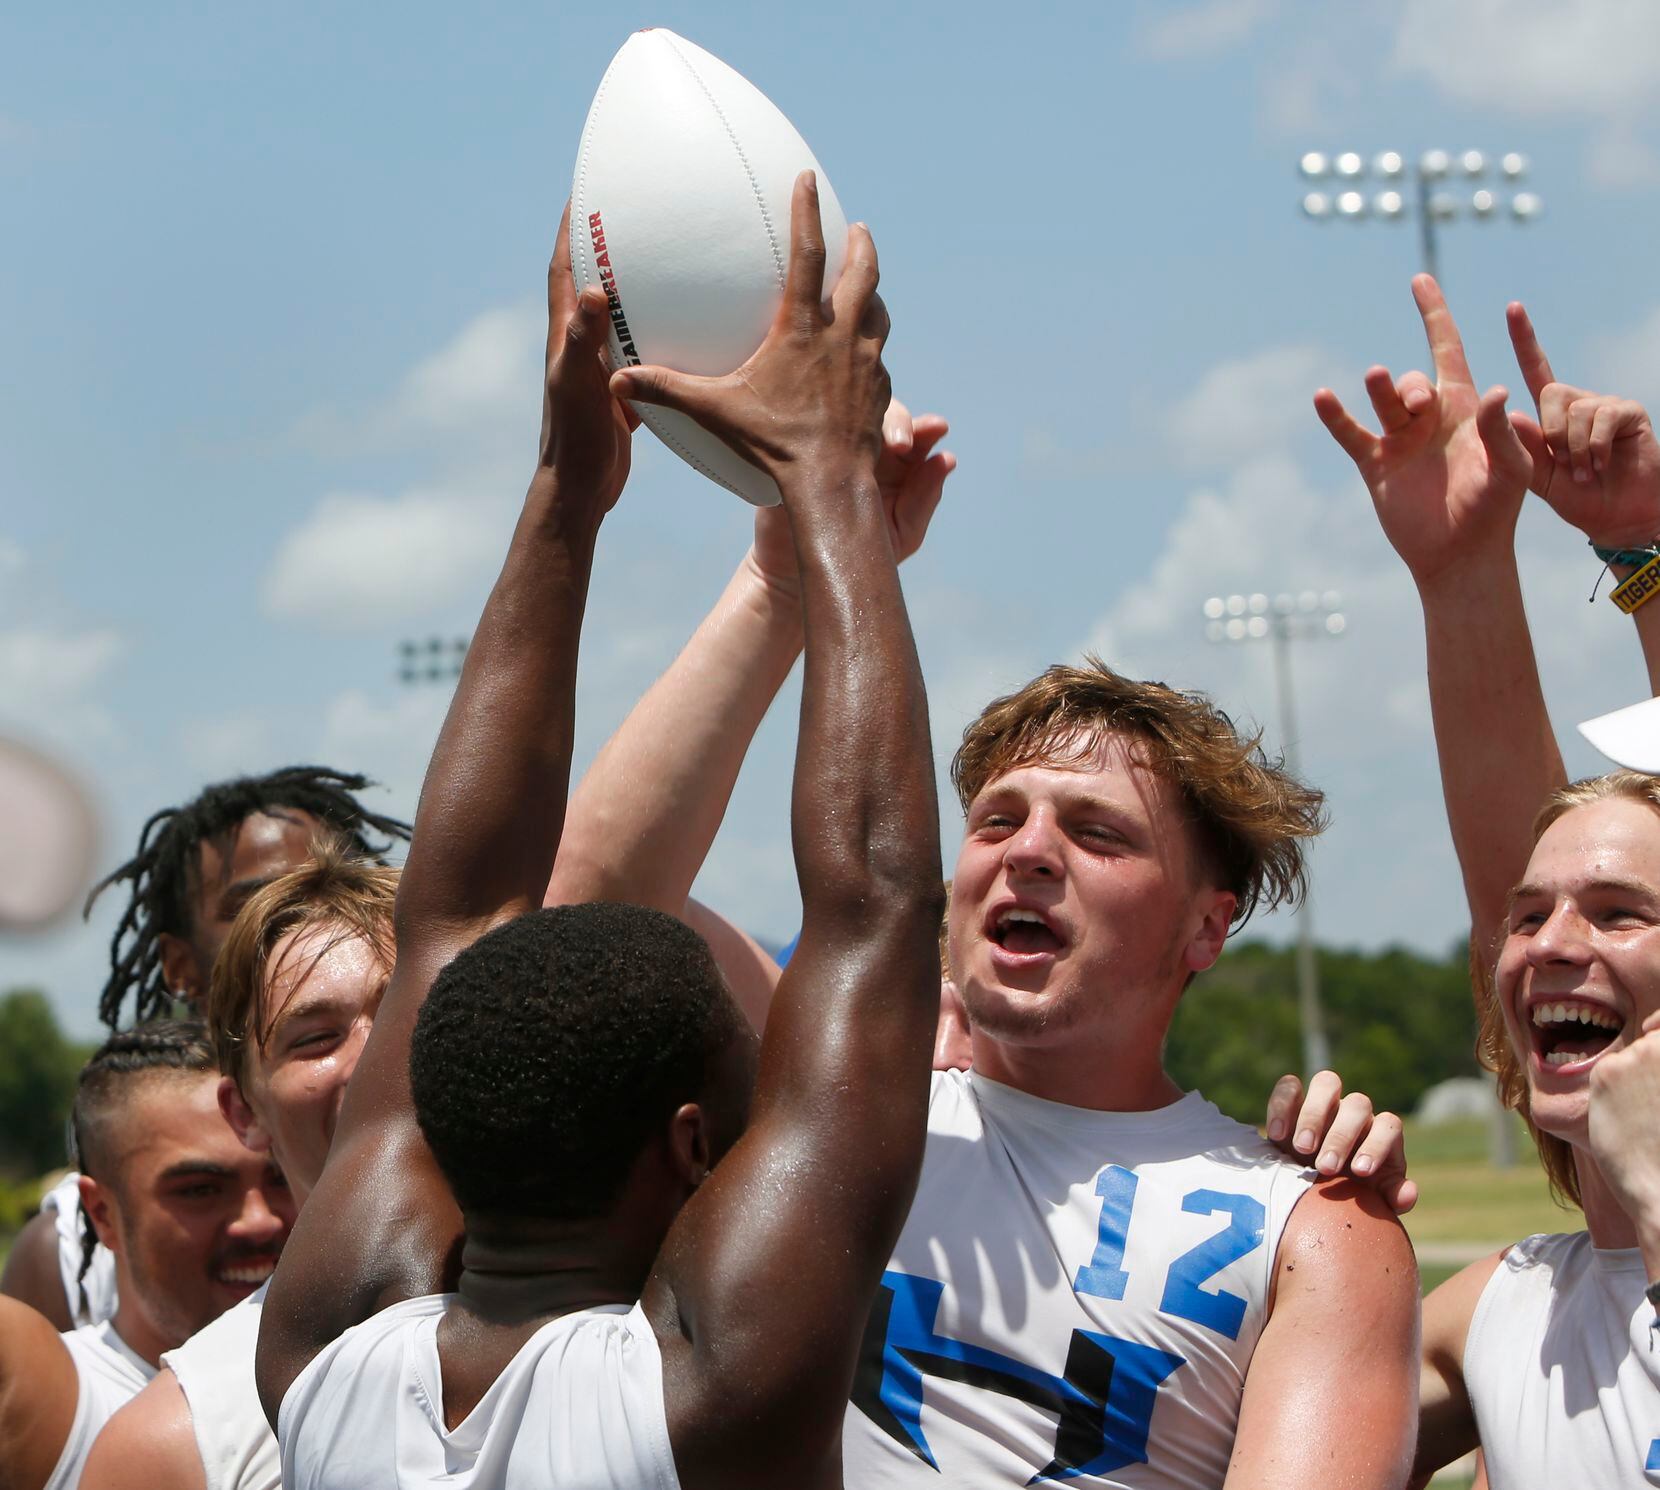 Chris Workley (12) is joined by teammates as they celebrated by raising the Division 1 Championship football which was presented to the Hawks following their 28-26 victory over Lake Travis. The state 7 on 7 football tournament attracted athletes from schools throughout the state. The competition brackets for the final day of competition was held at Veterans Park in College Station on June 25, 2021. (Steve Hamm/ Special Contributor)